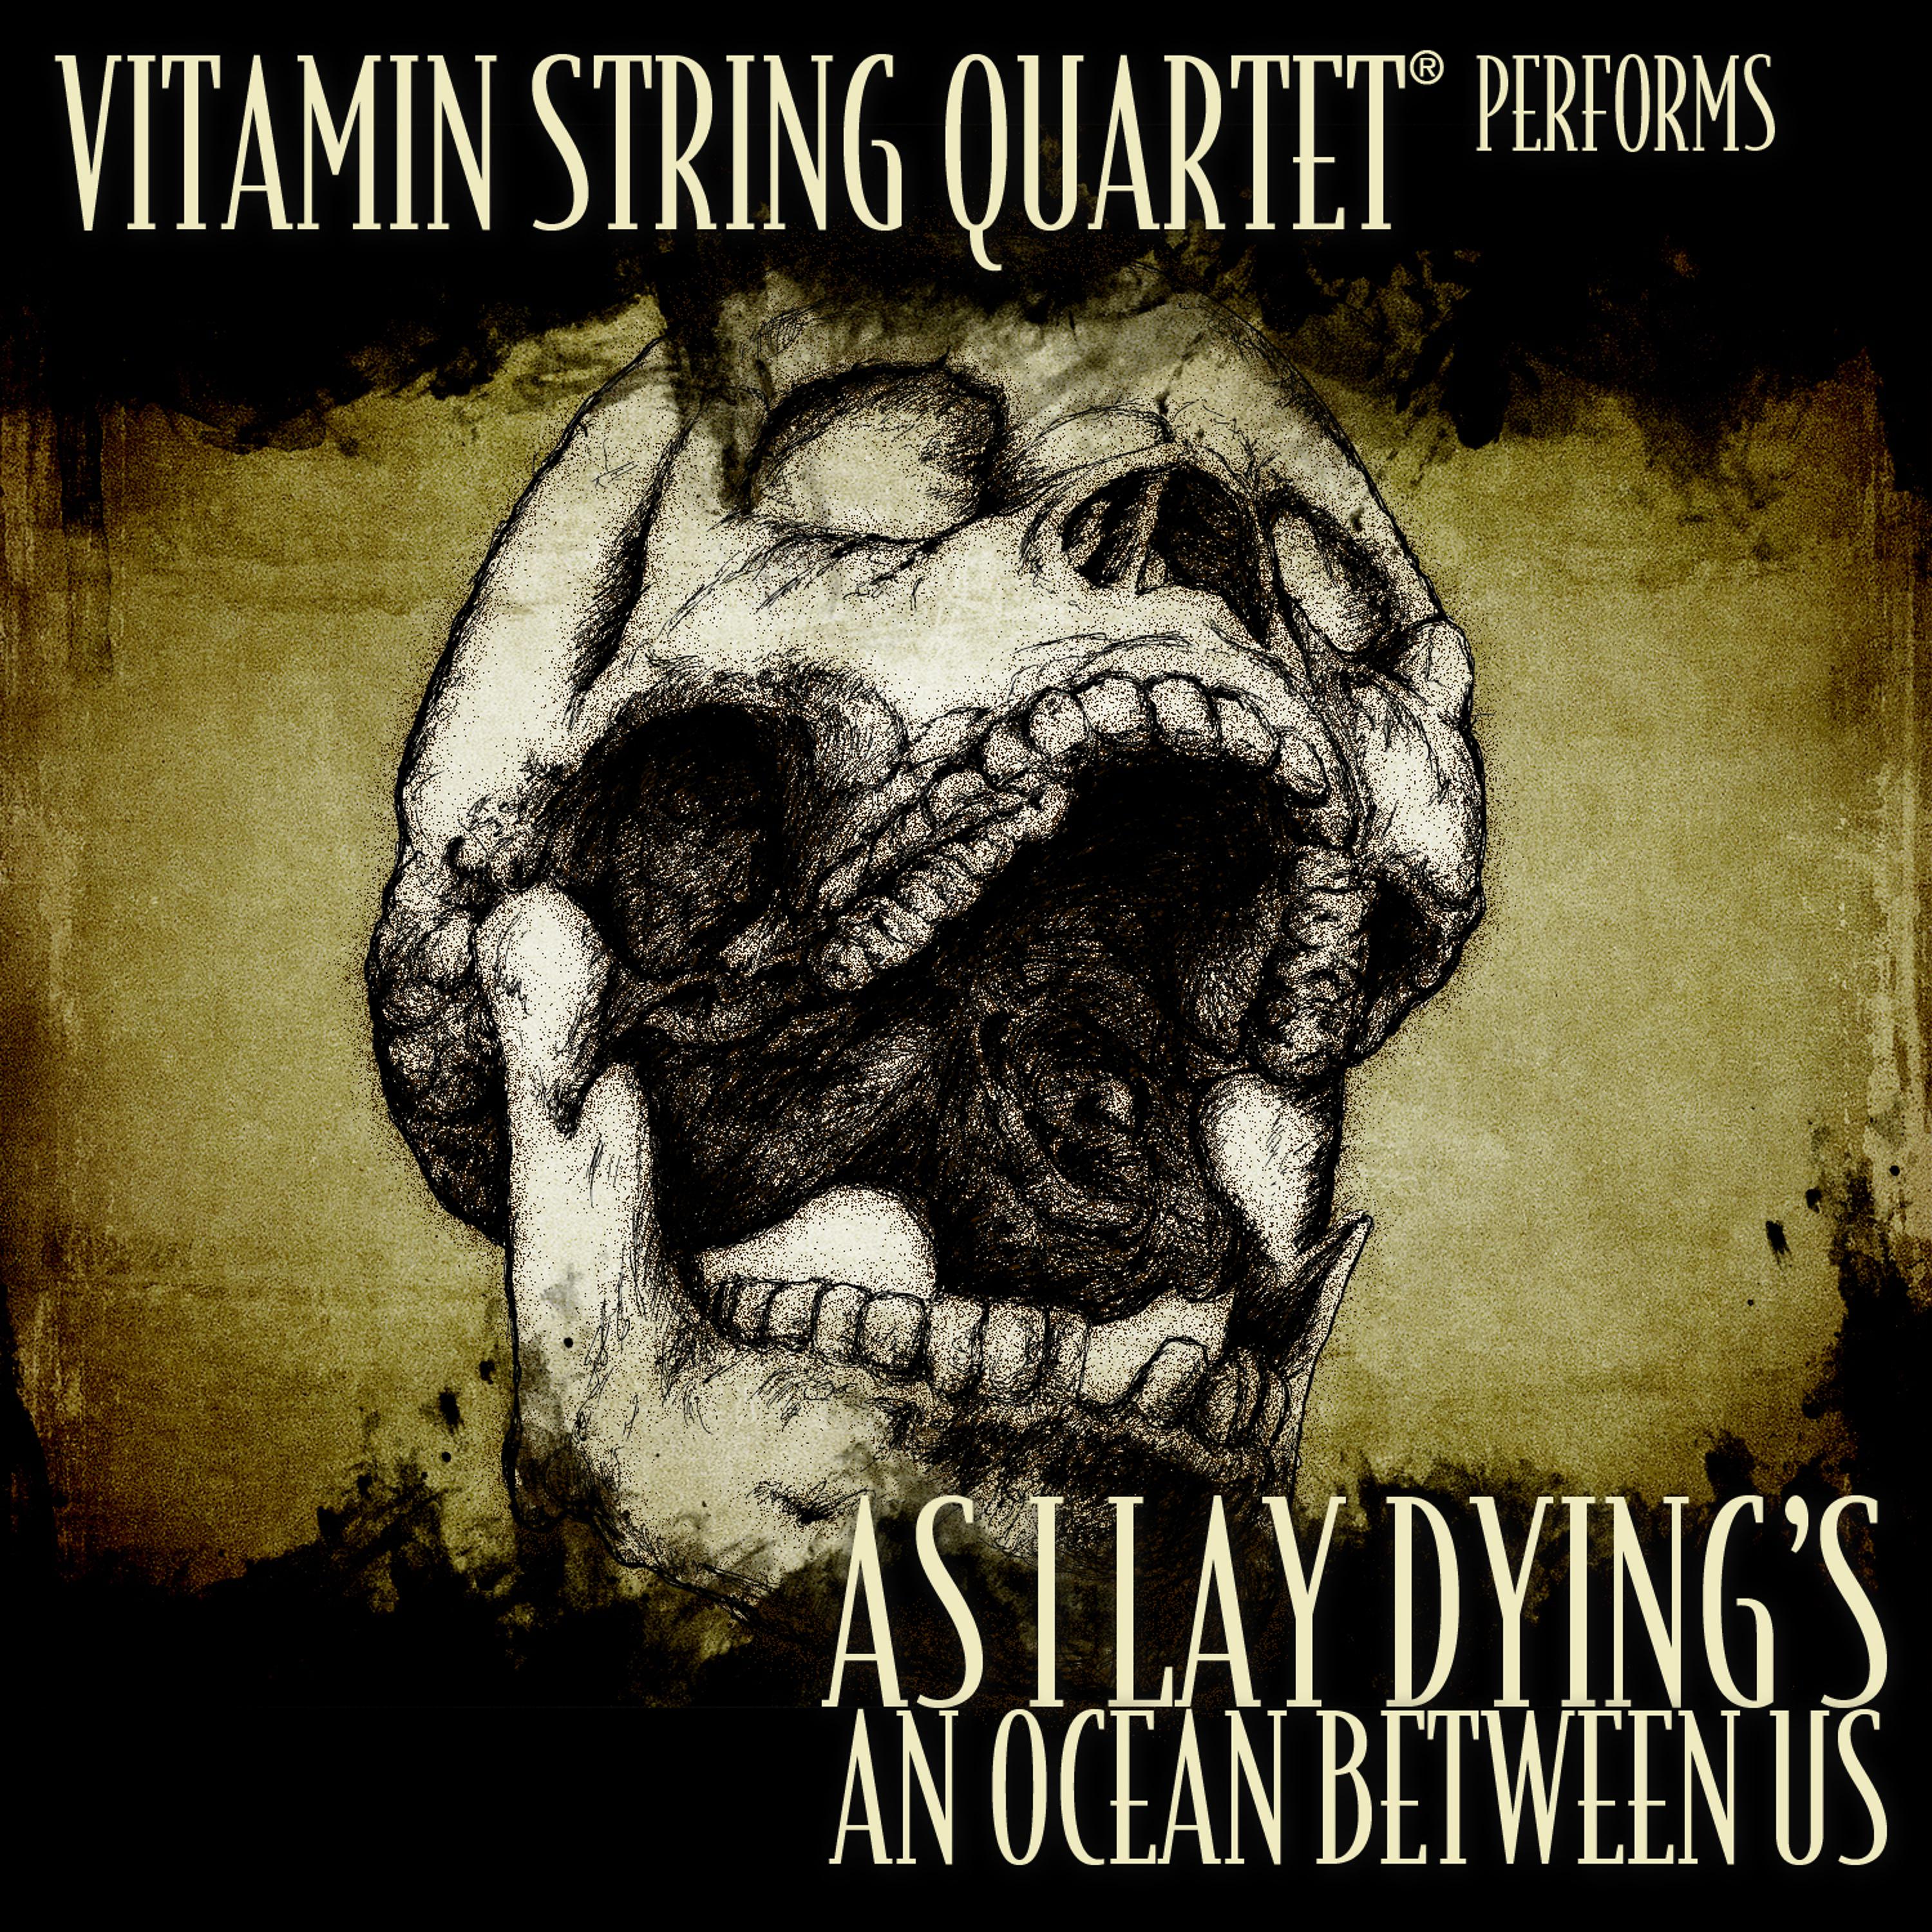 Постер альбома Vitamin String Quartet Performs As I Lay Dying's An Ocean Between Us